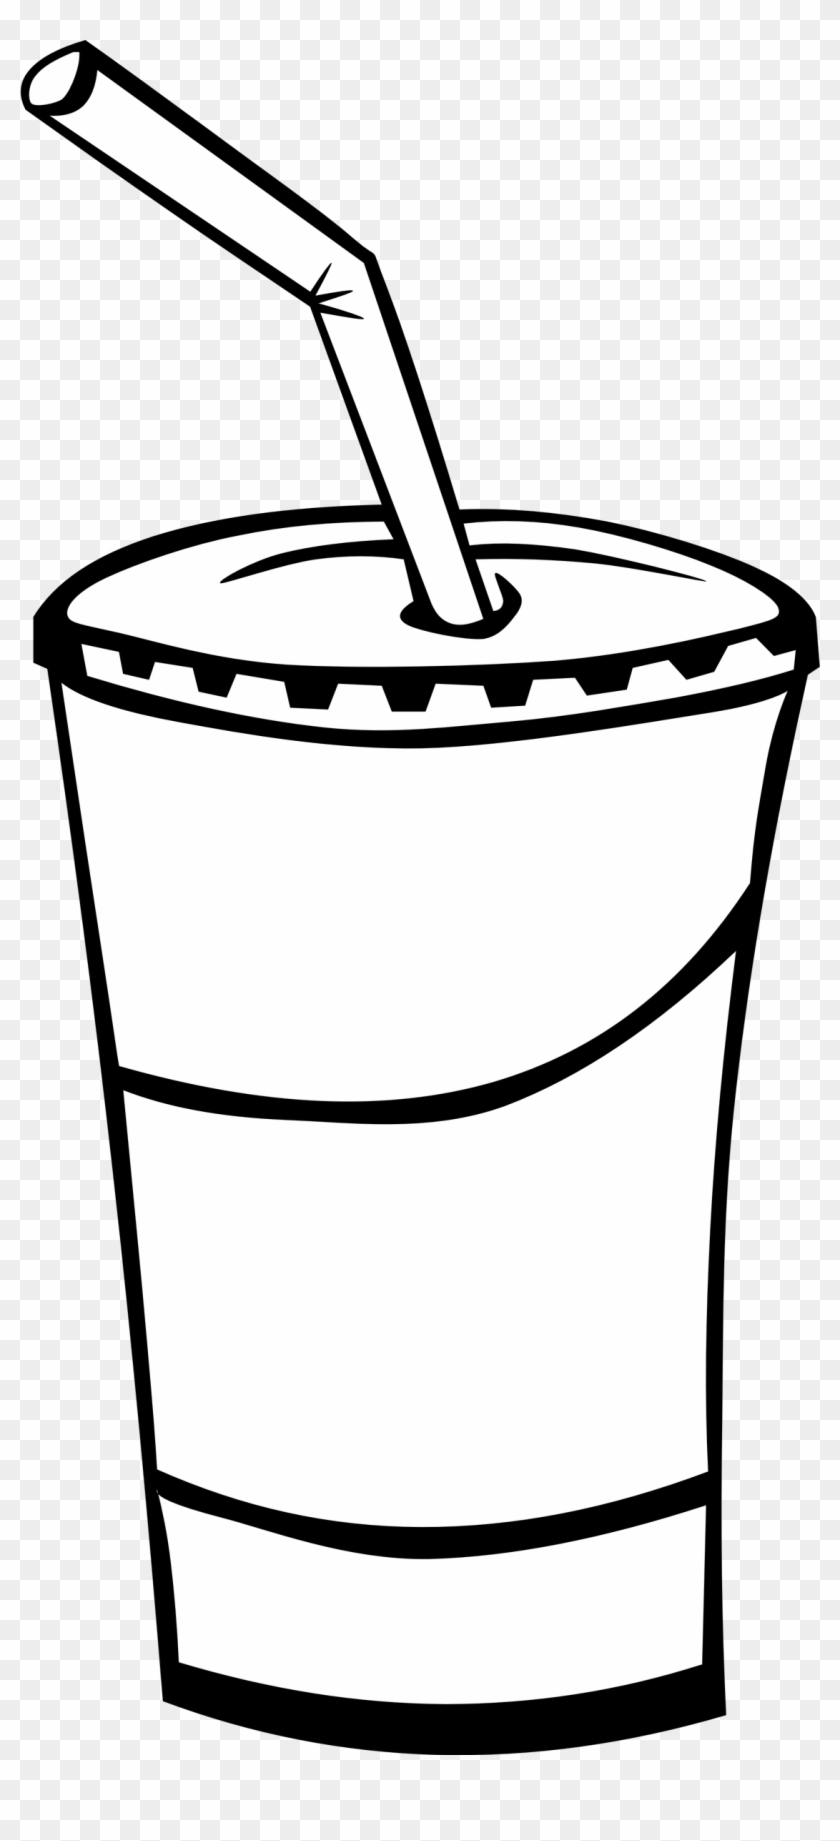 Soft Drink Clip Art Black And White Draw A Soda Cup Free